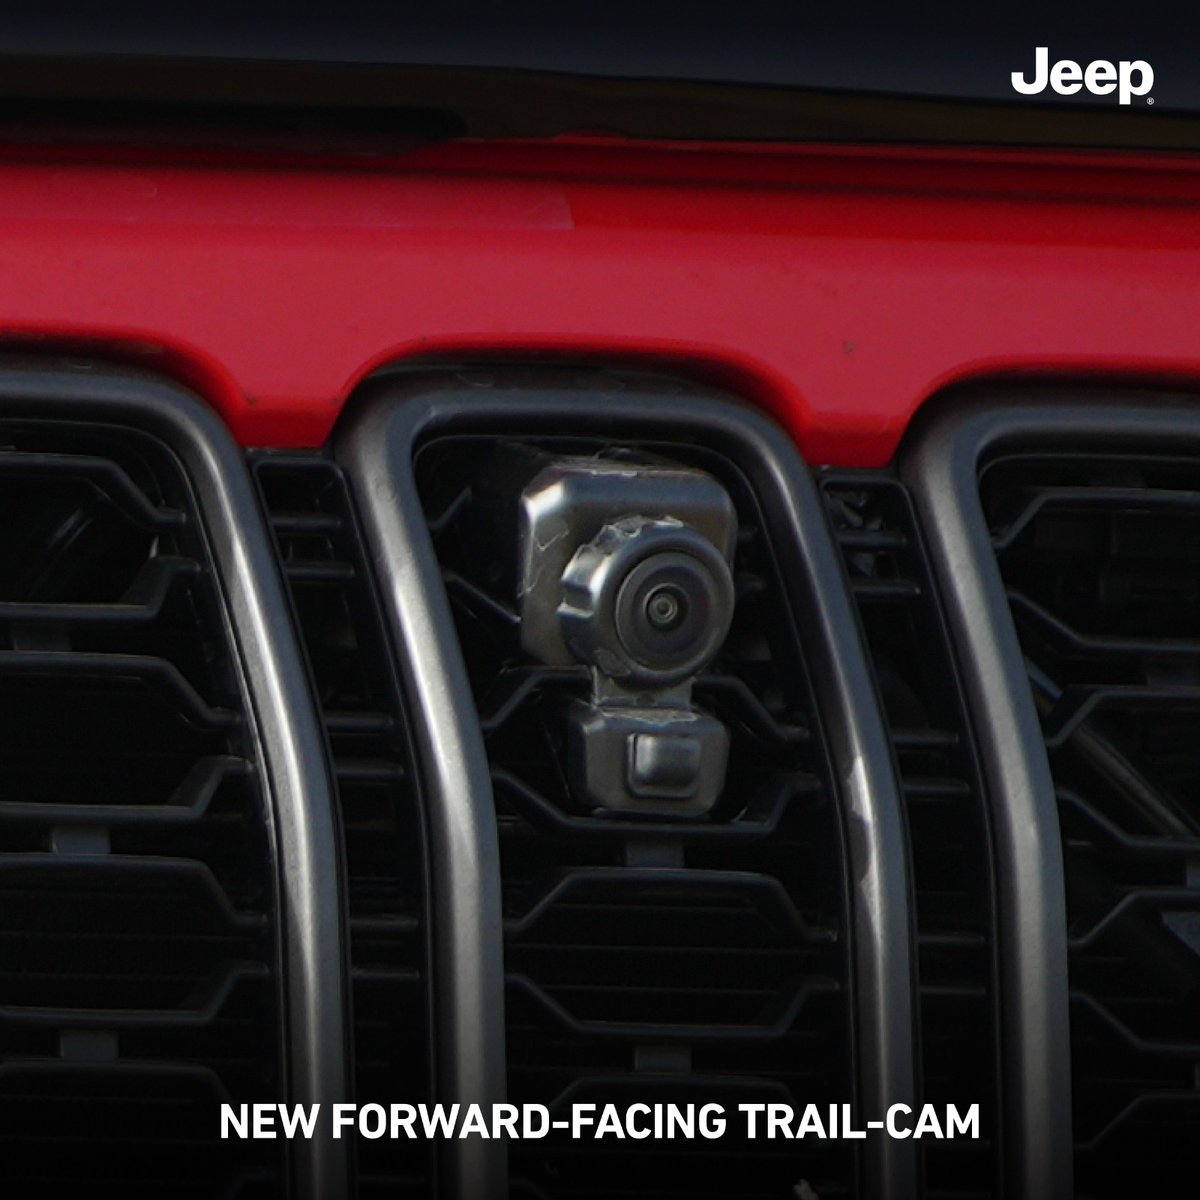 Witness the icon that redefines luxury adventures. Drive the all-new Jeep Wrangler with advanced features that makes every adventure an ultra-premium luxury experience. Steer towards the ultimate Jeep Life with the one and only Jeep Wrangler 2024.

#jeep #jeepindia #jeeplife